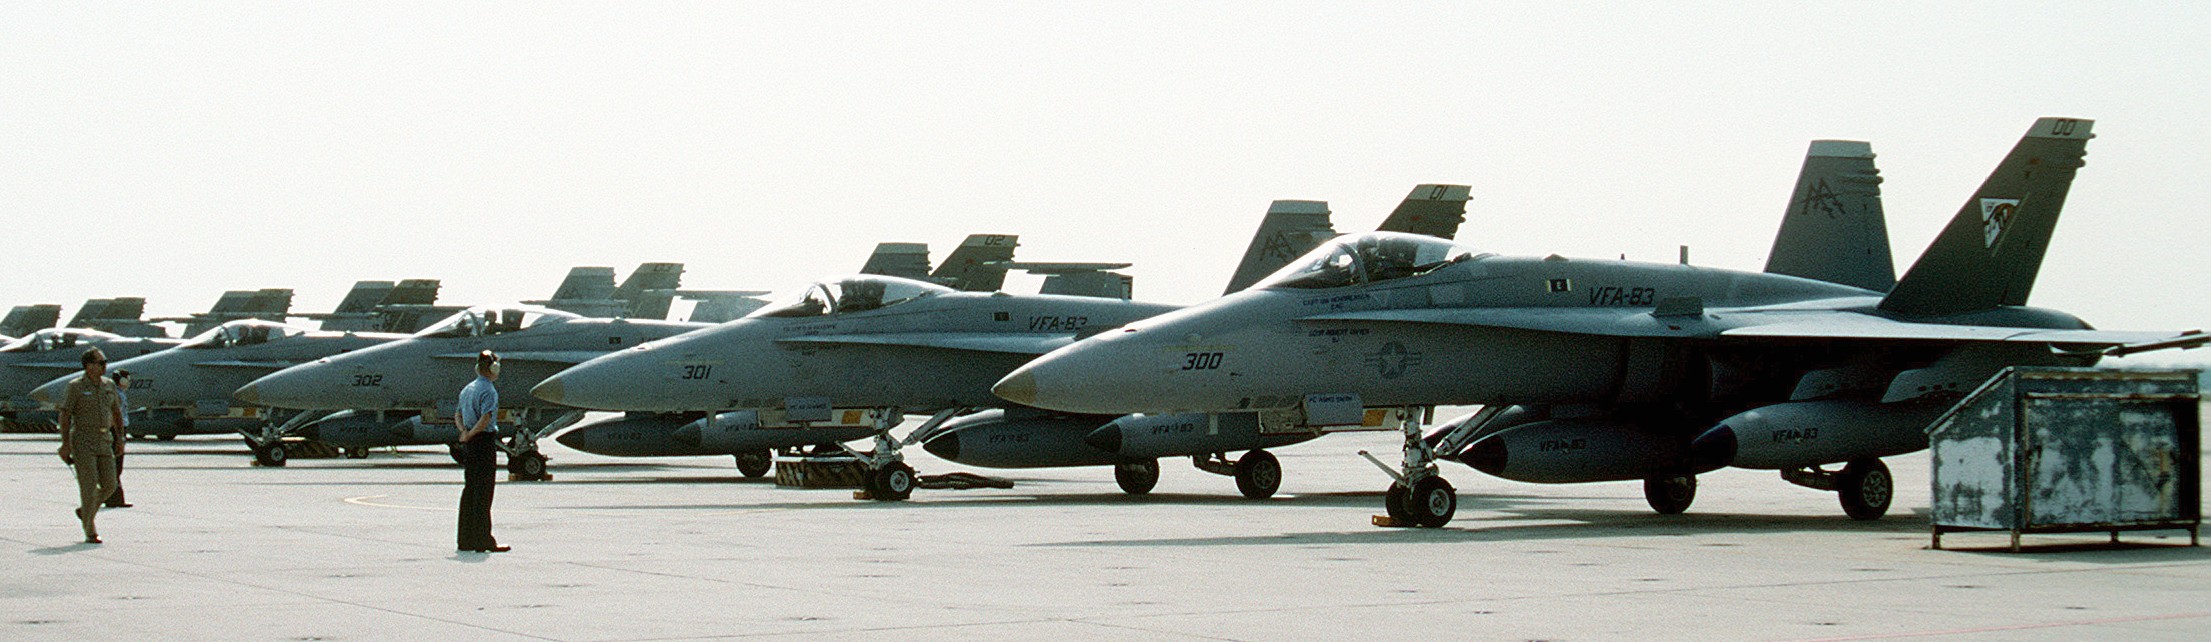 vfa-83 rampagers strike fighter squadron f/a-18c hornet cvw-17 nas cecil field florida 07